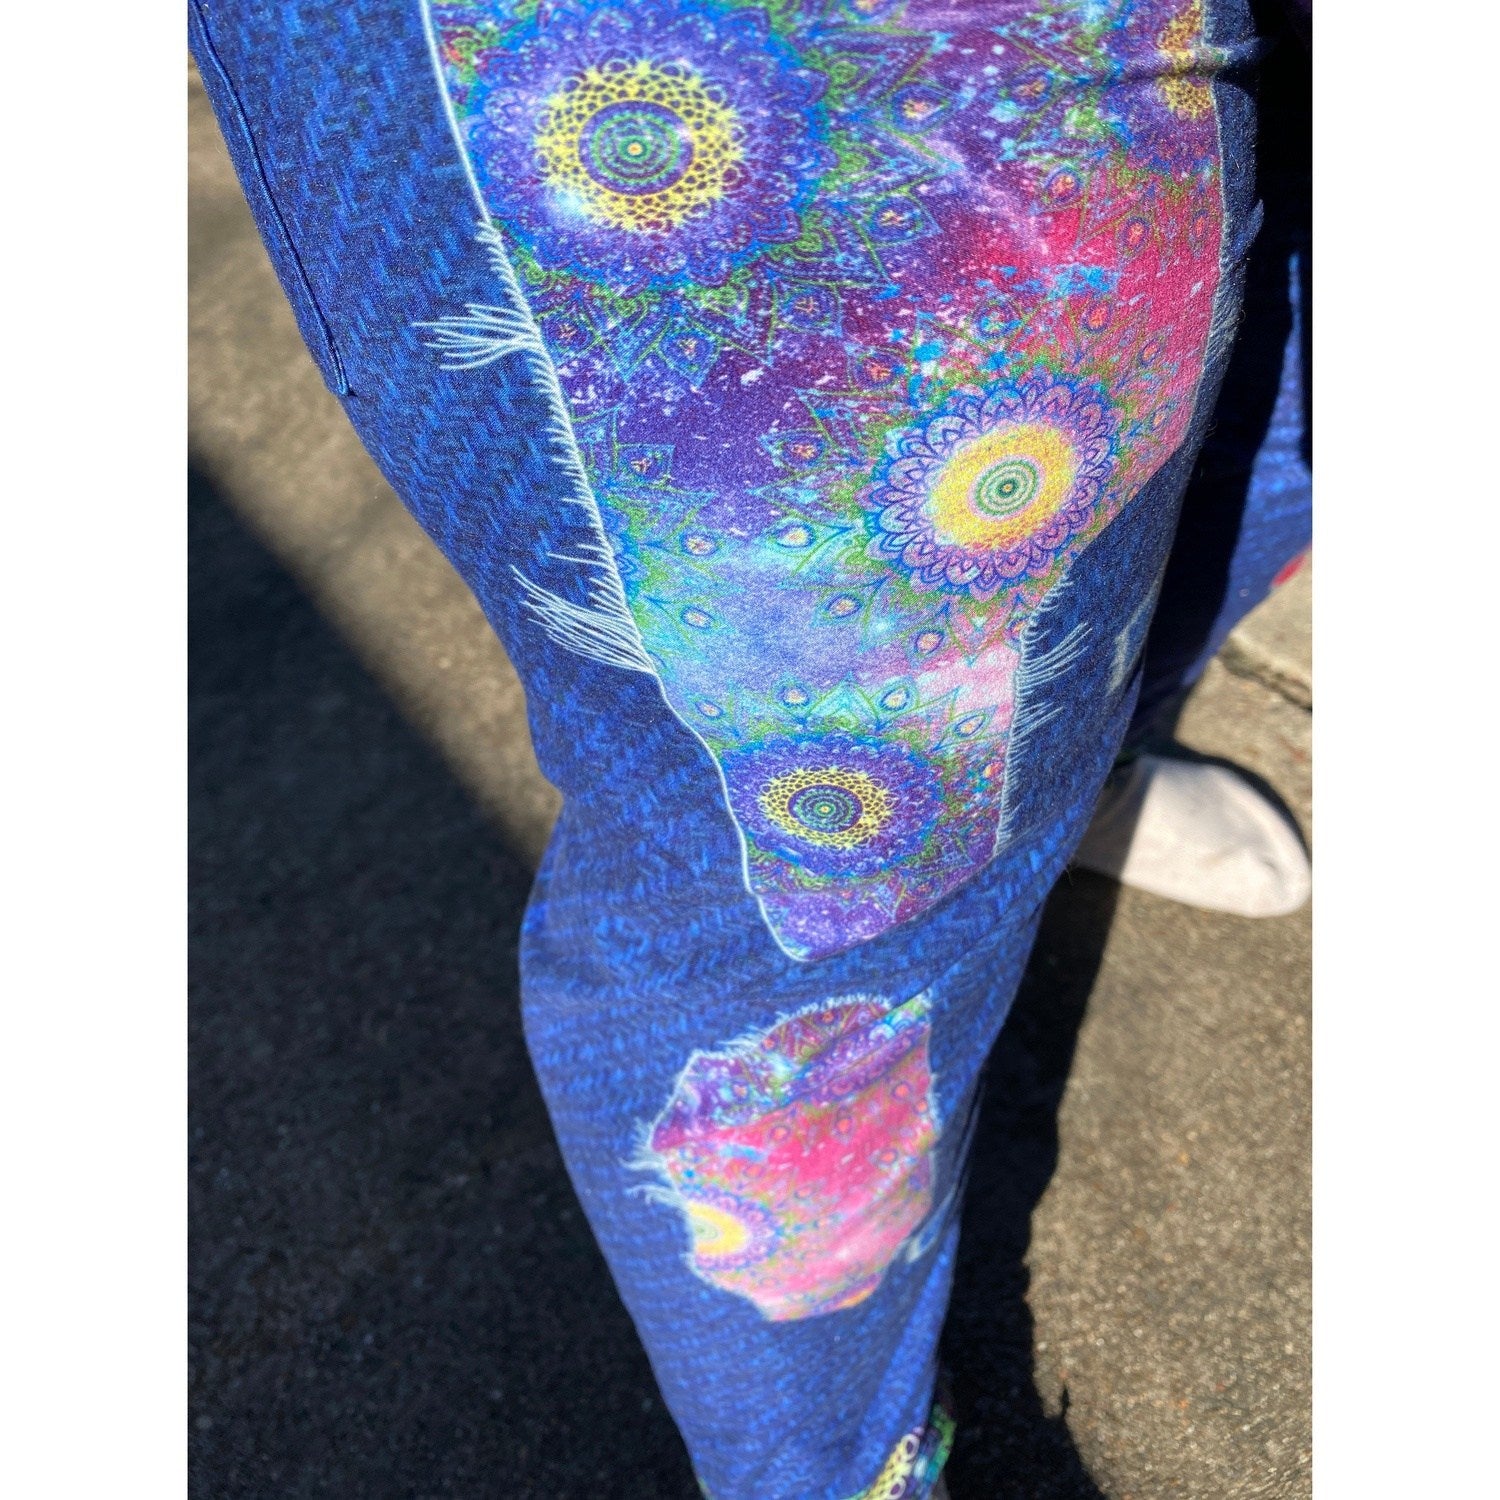 Jean Printed Leggings with faux Mandala Patches in Capri with Pockets